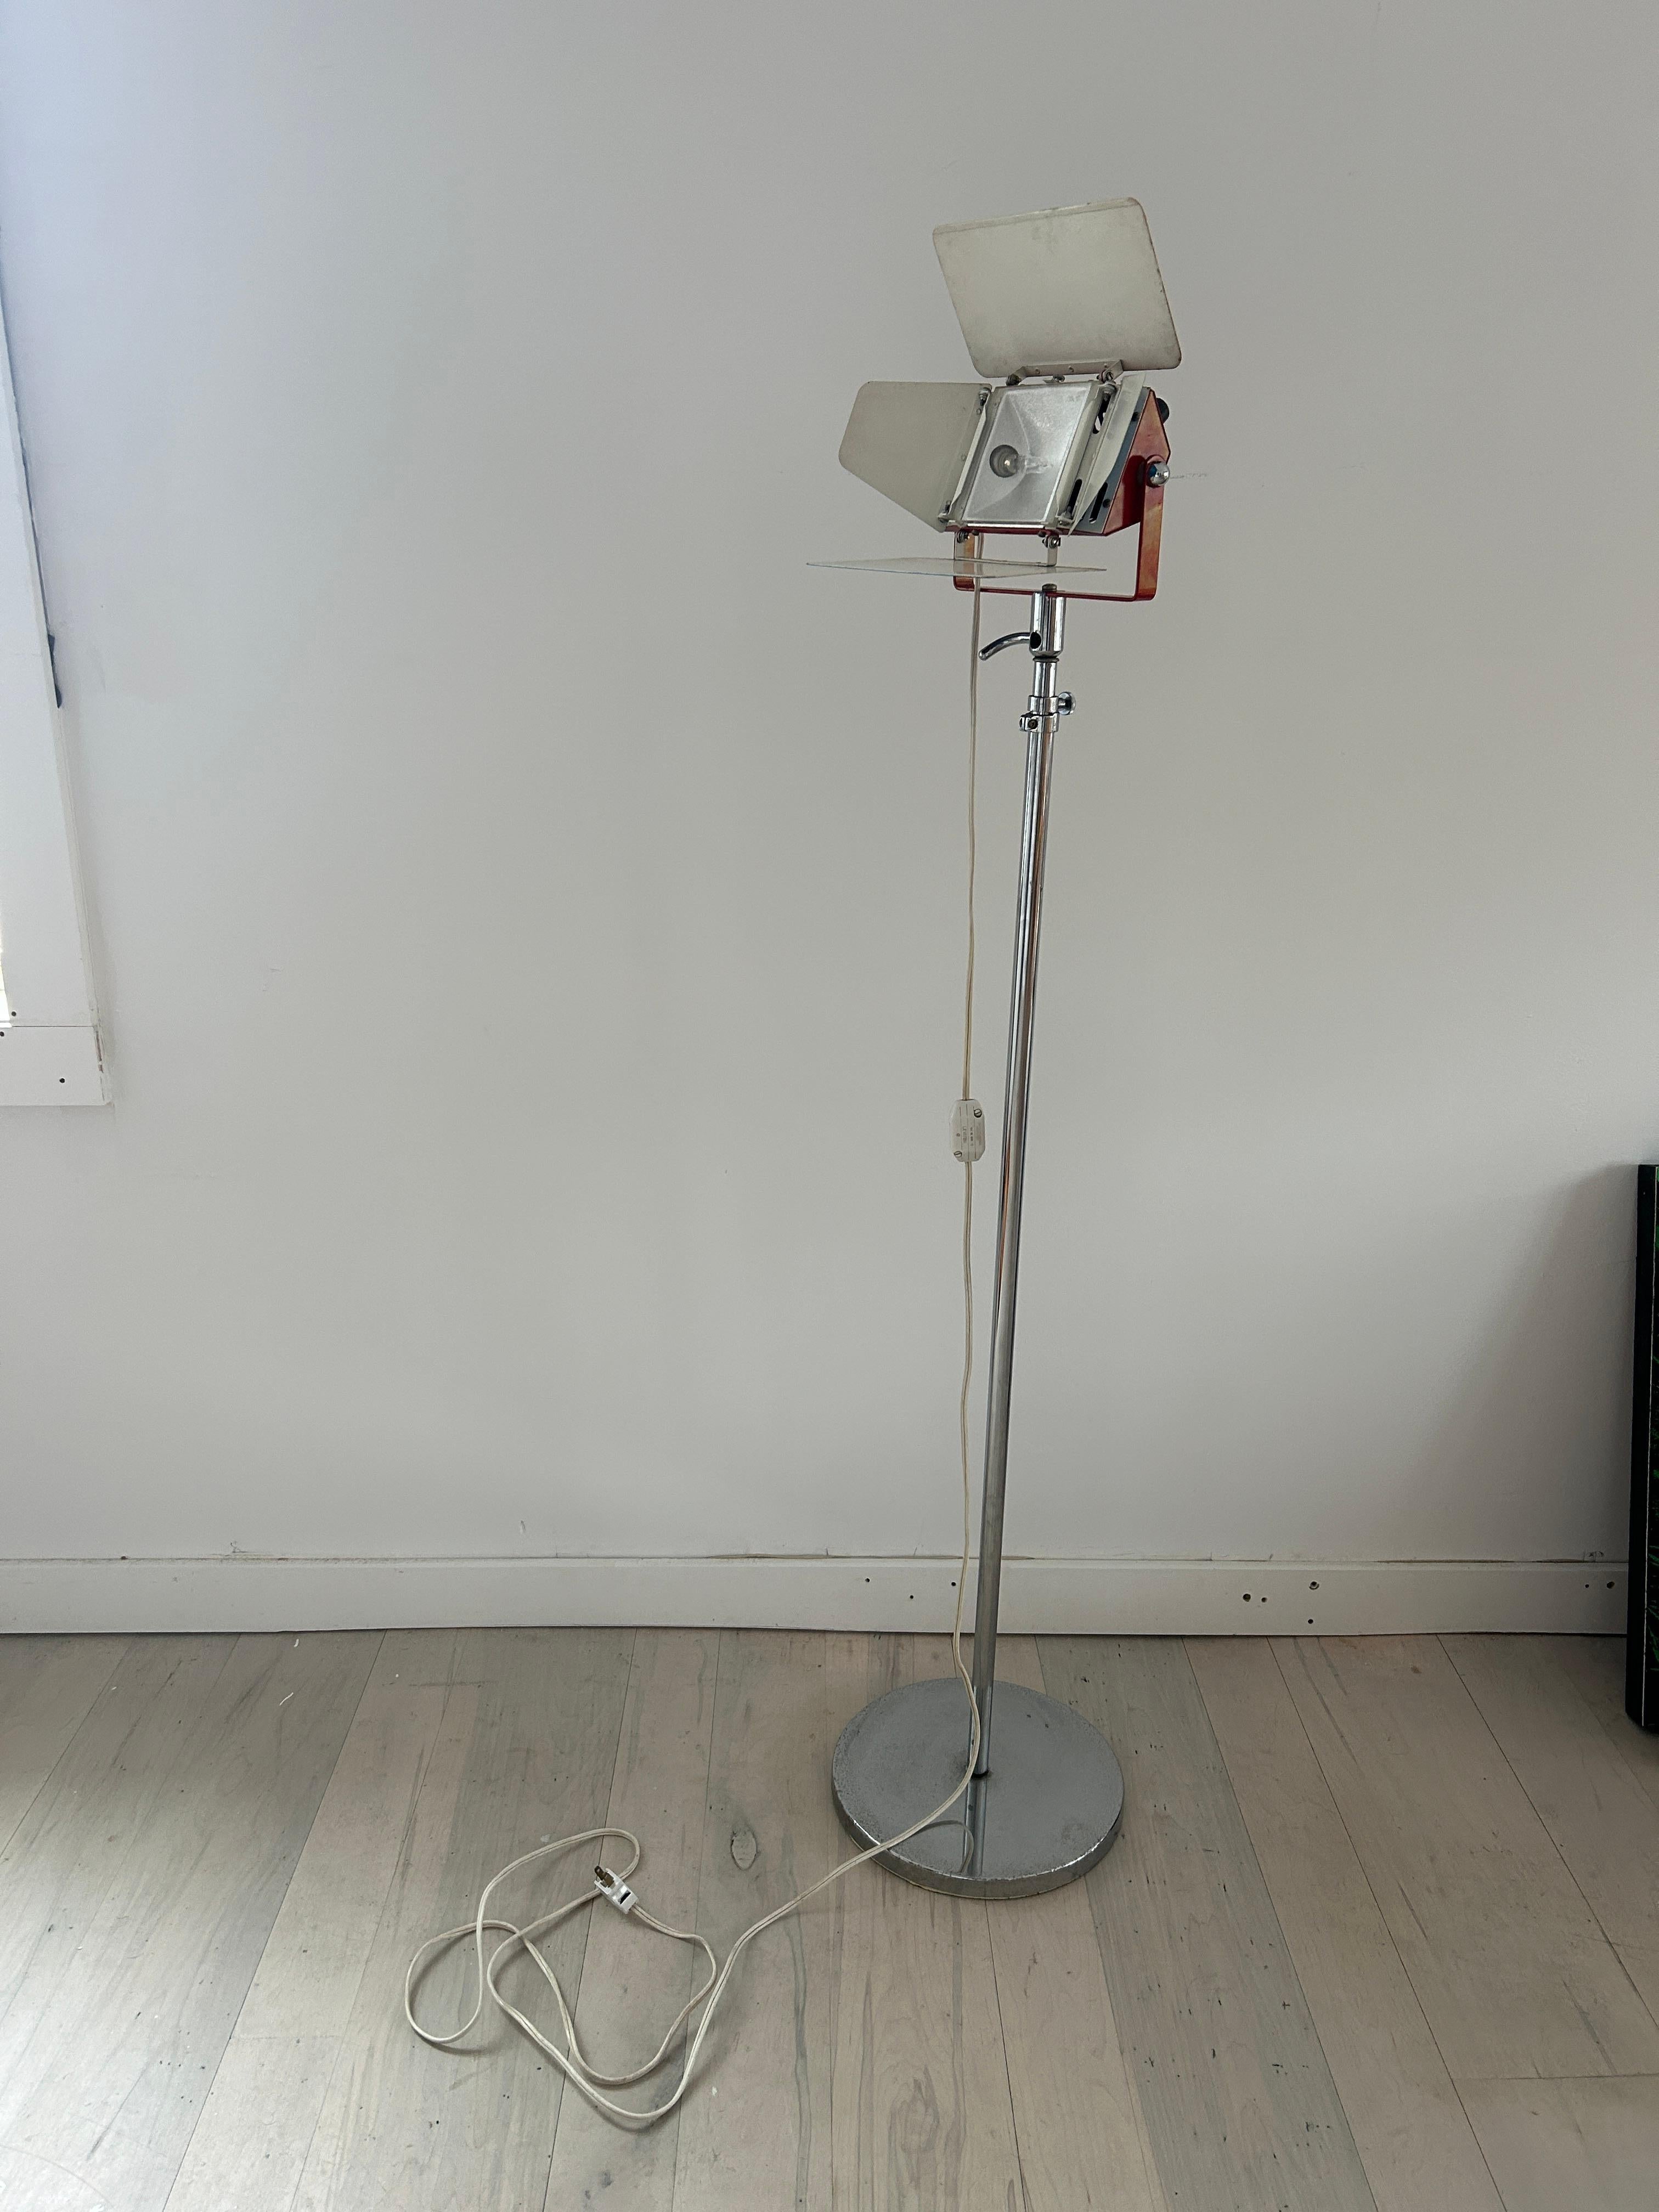 Mid-Century Modern Colortran midcentury chrome floor lamp. Film style floor lamp circa 1980. Blue and red lamp with chrome base. Light has adjustable barn doors which angle the light. Halogen bulb 120v - American plug. Has dimmer in cord - ready for